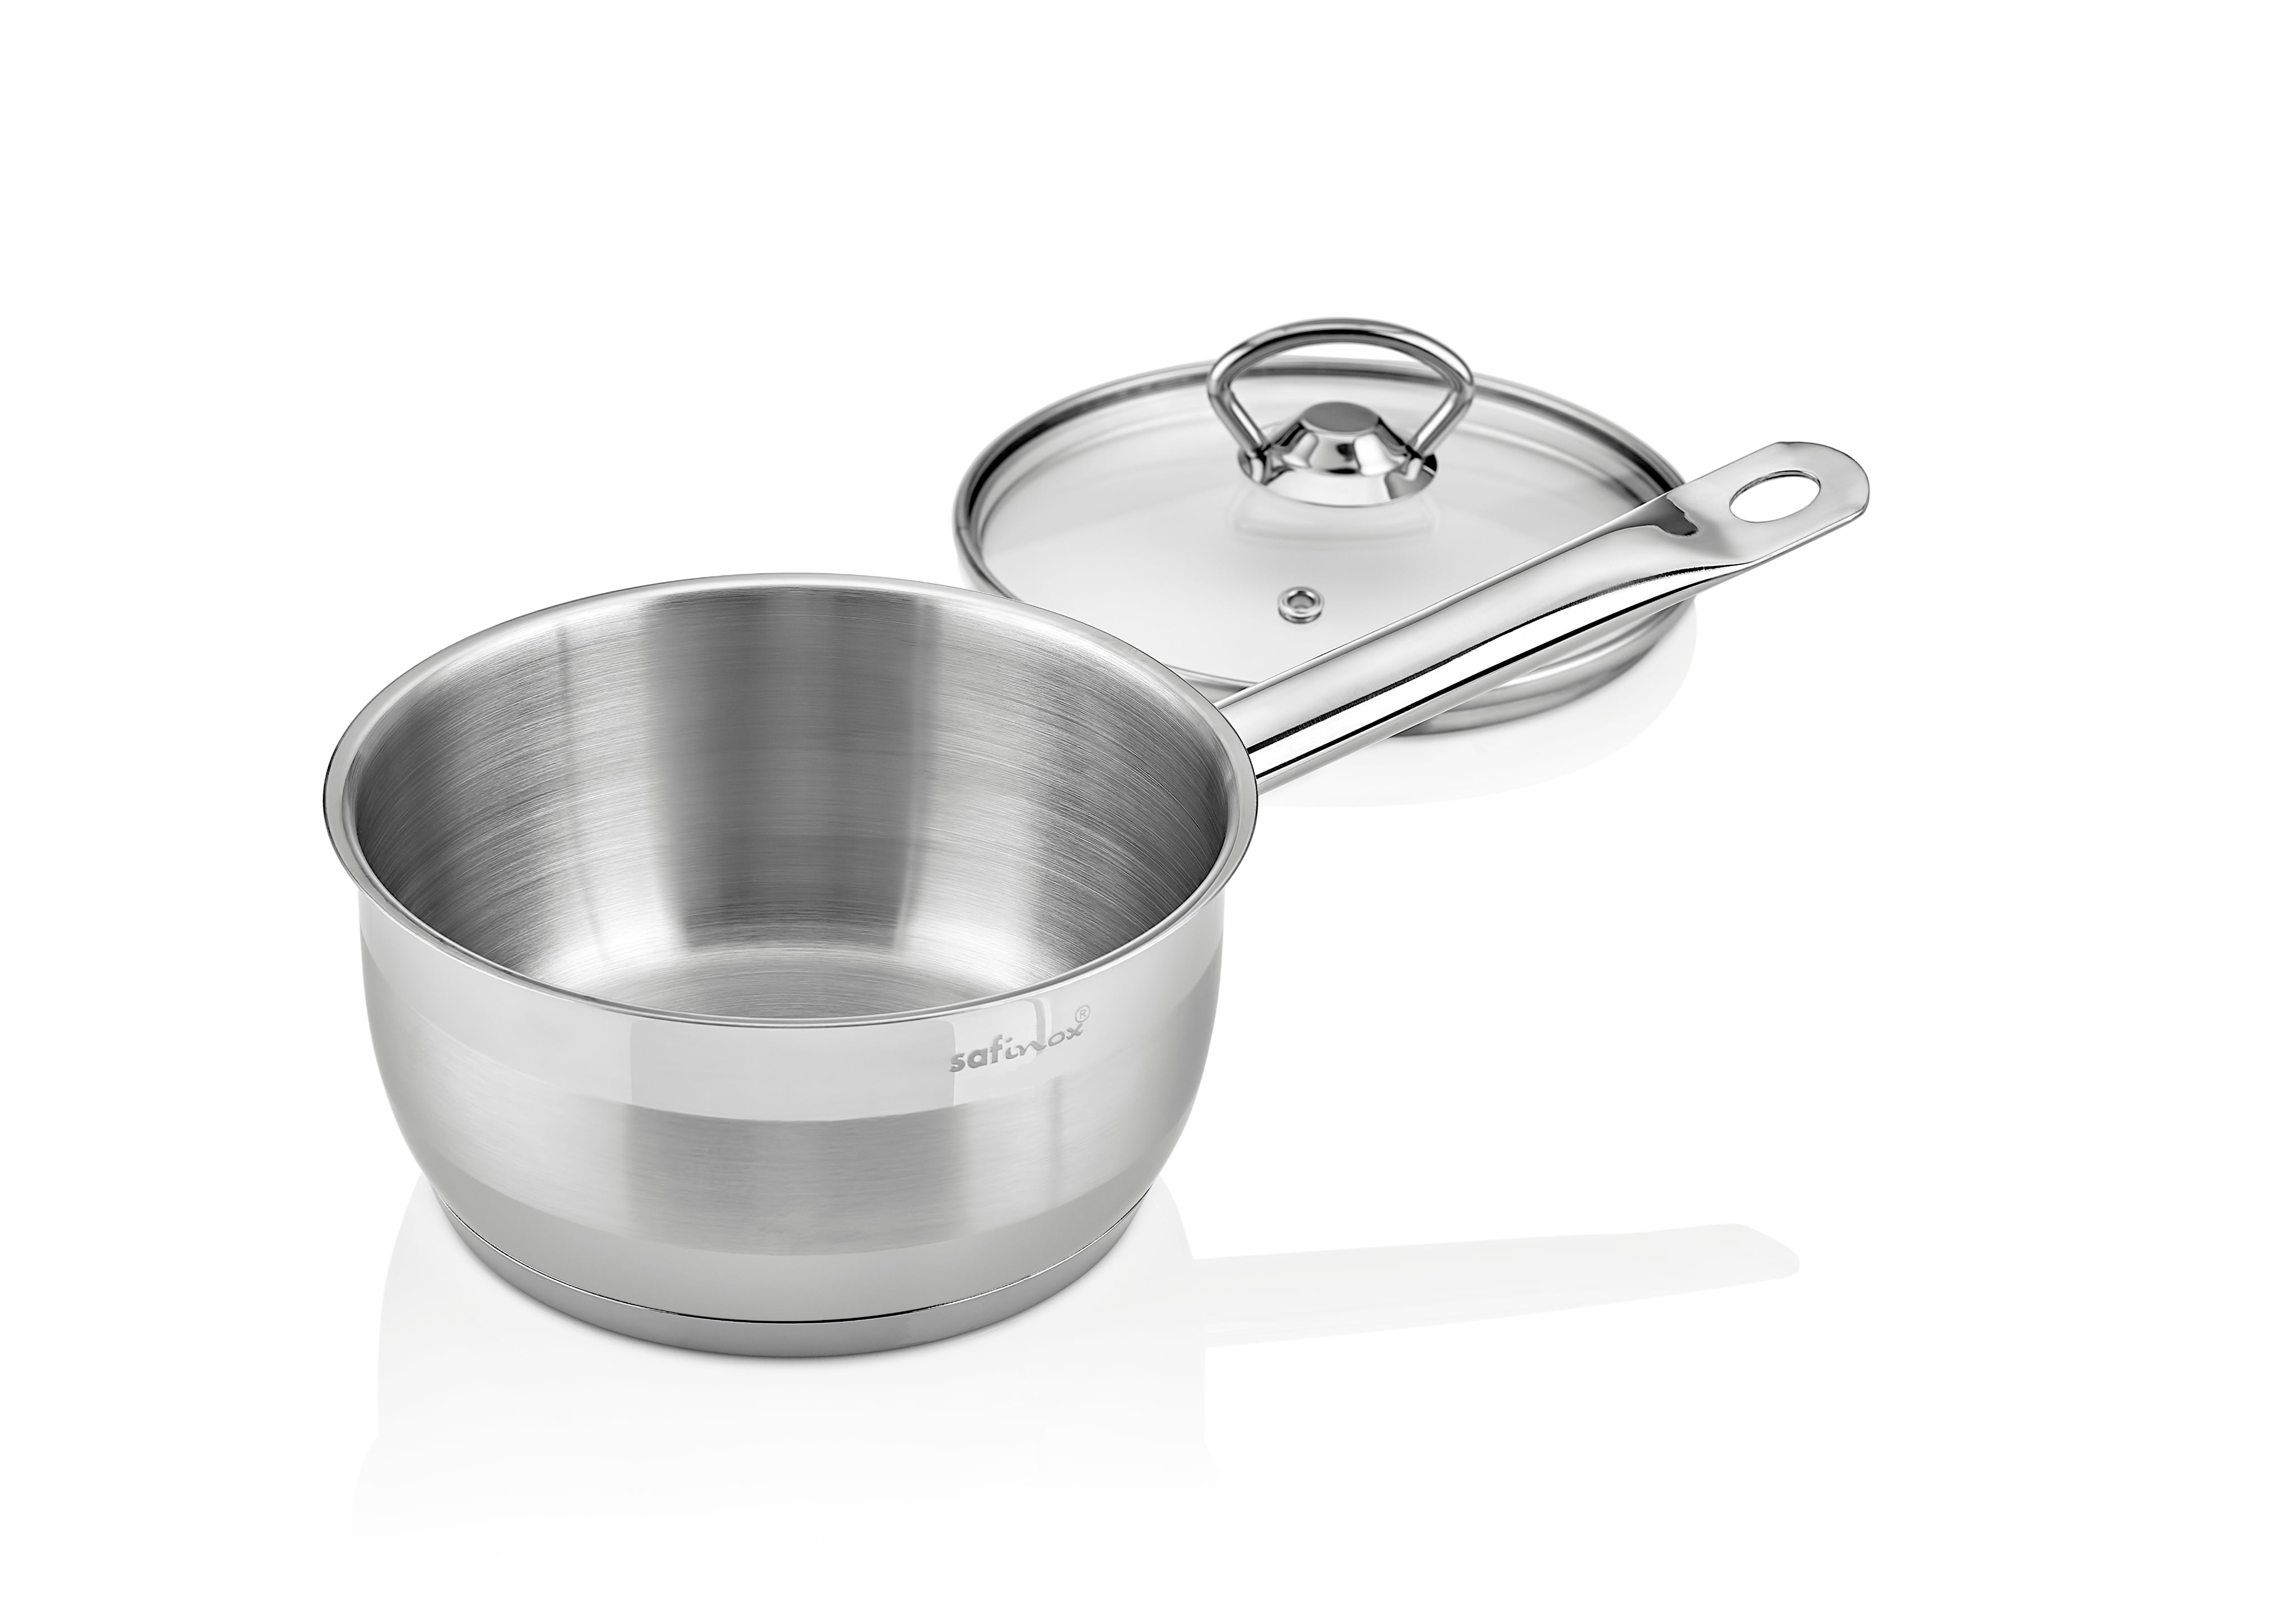 APLSS 3 Quart 18/10 Tri-Ply Stainless Steel Saucepan with Single long  handle and Glass Lid - Food-Grade and Suitable for All Cooktops, Dishwasher  Safe